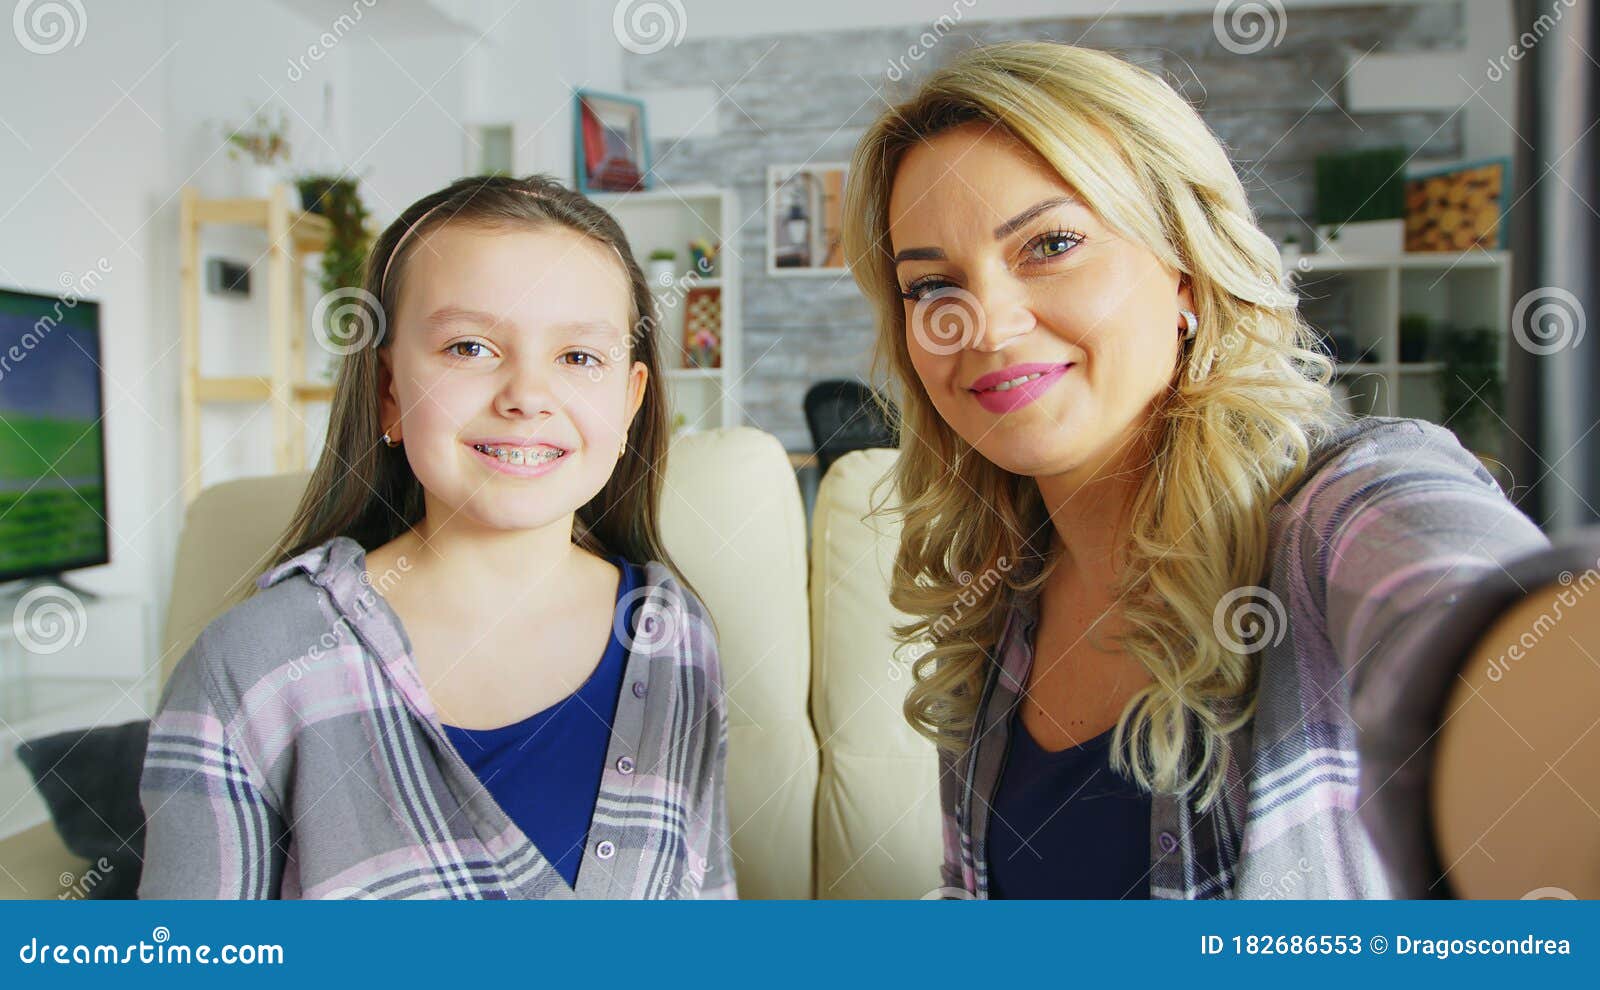 Pov Of Happy Daughter With Braces And Her Mother Stock Image Image Of